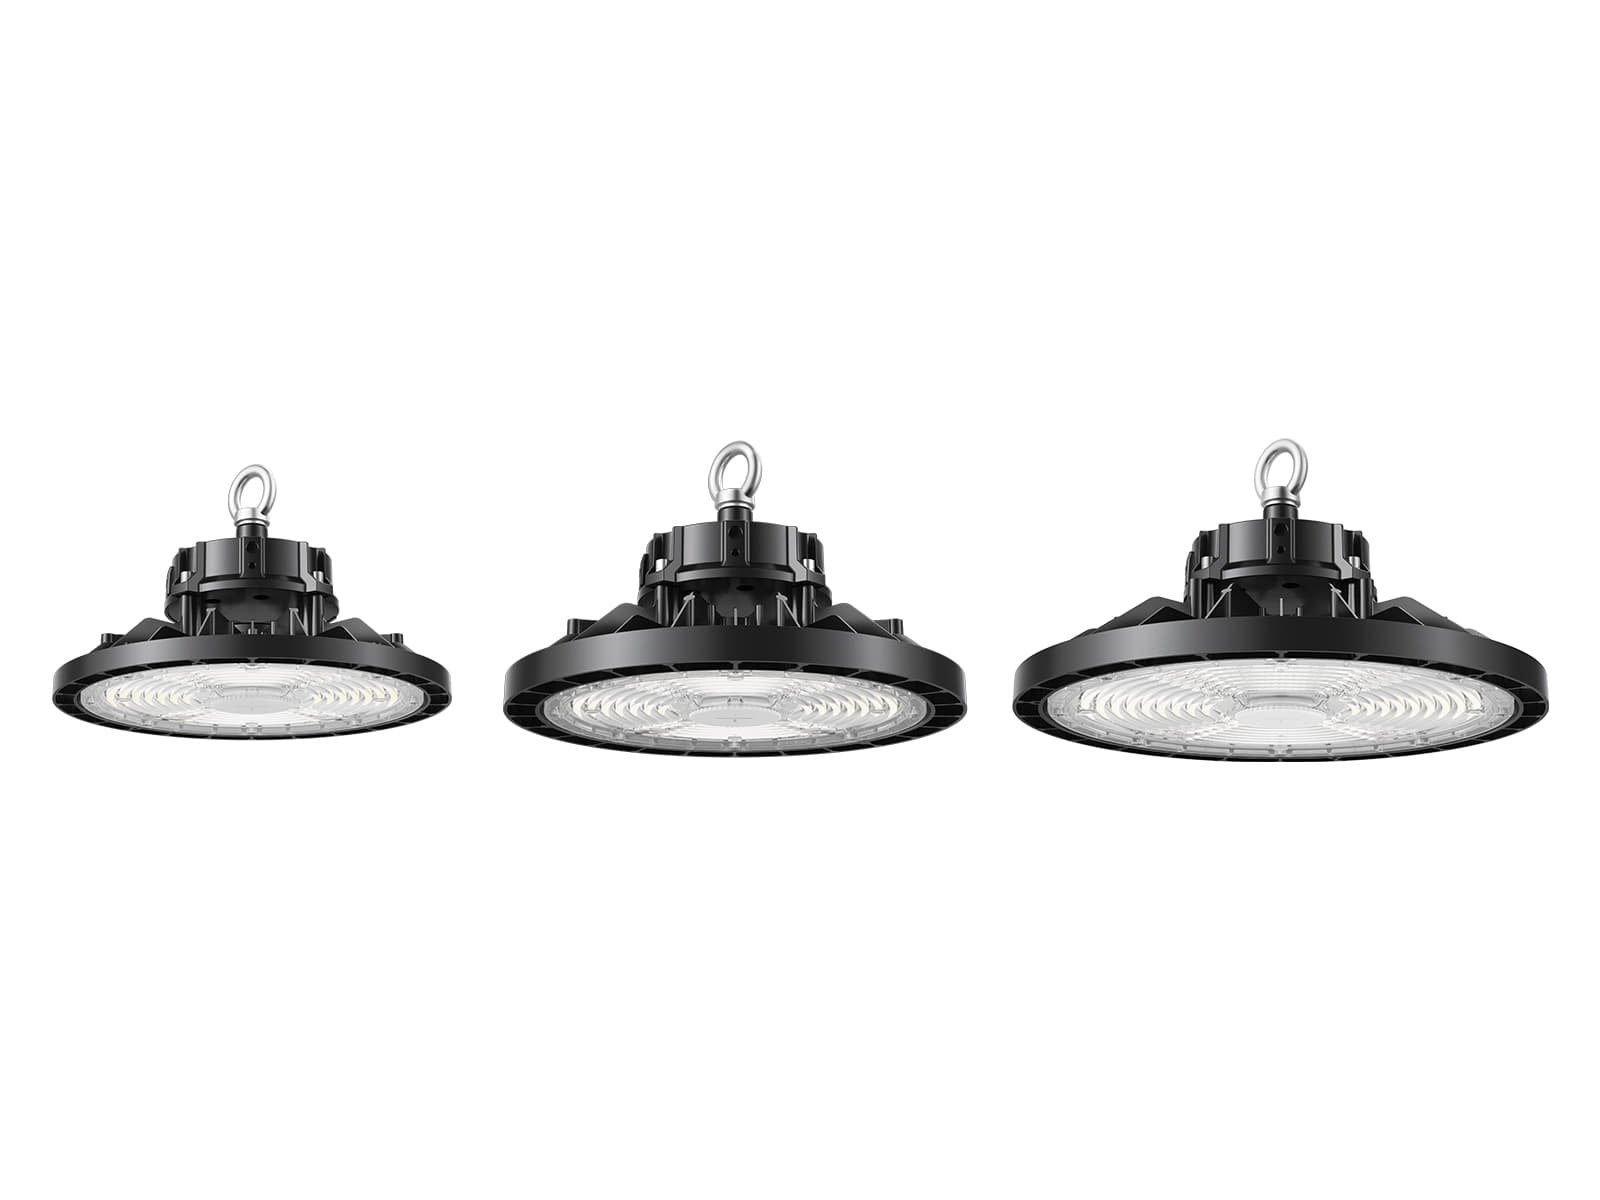 HB57 100W to 200W Competitive High Bay Light